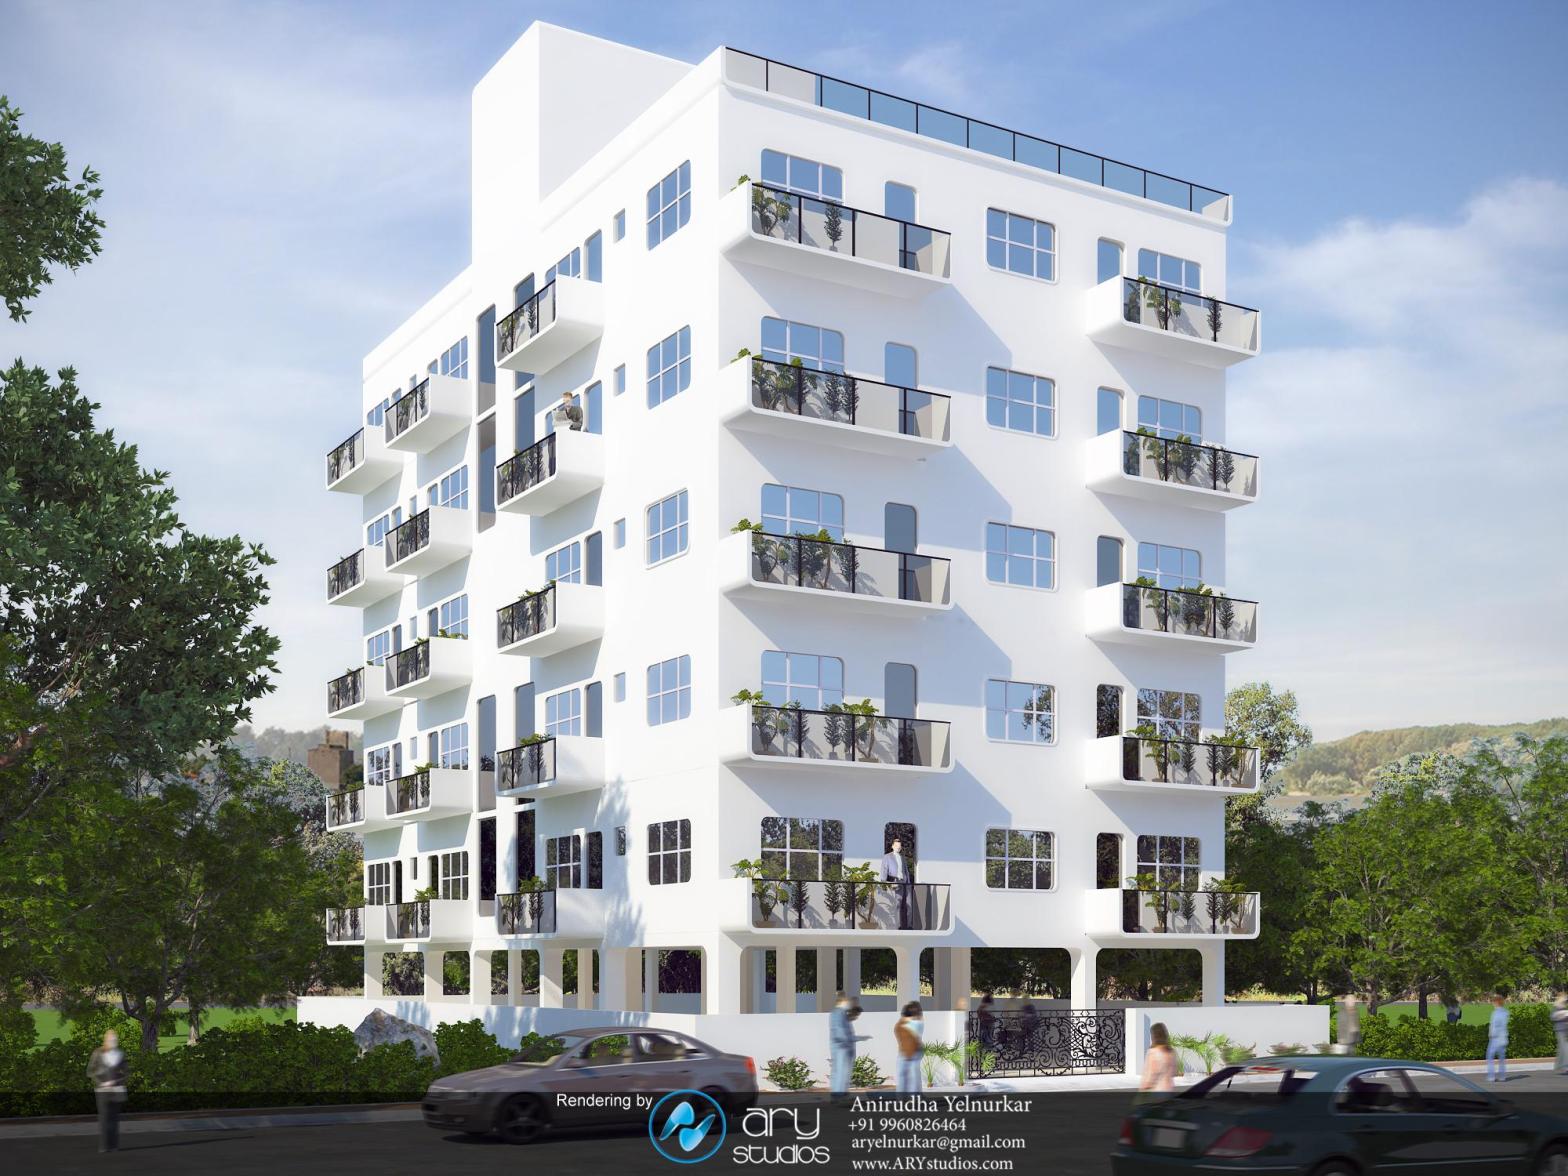 3D Architectural Rendering of Modern Apartment Building